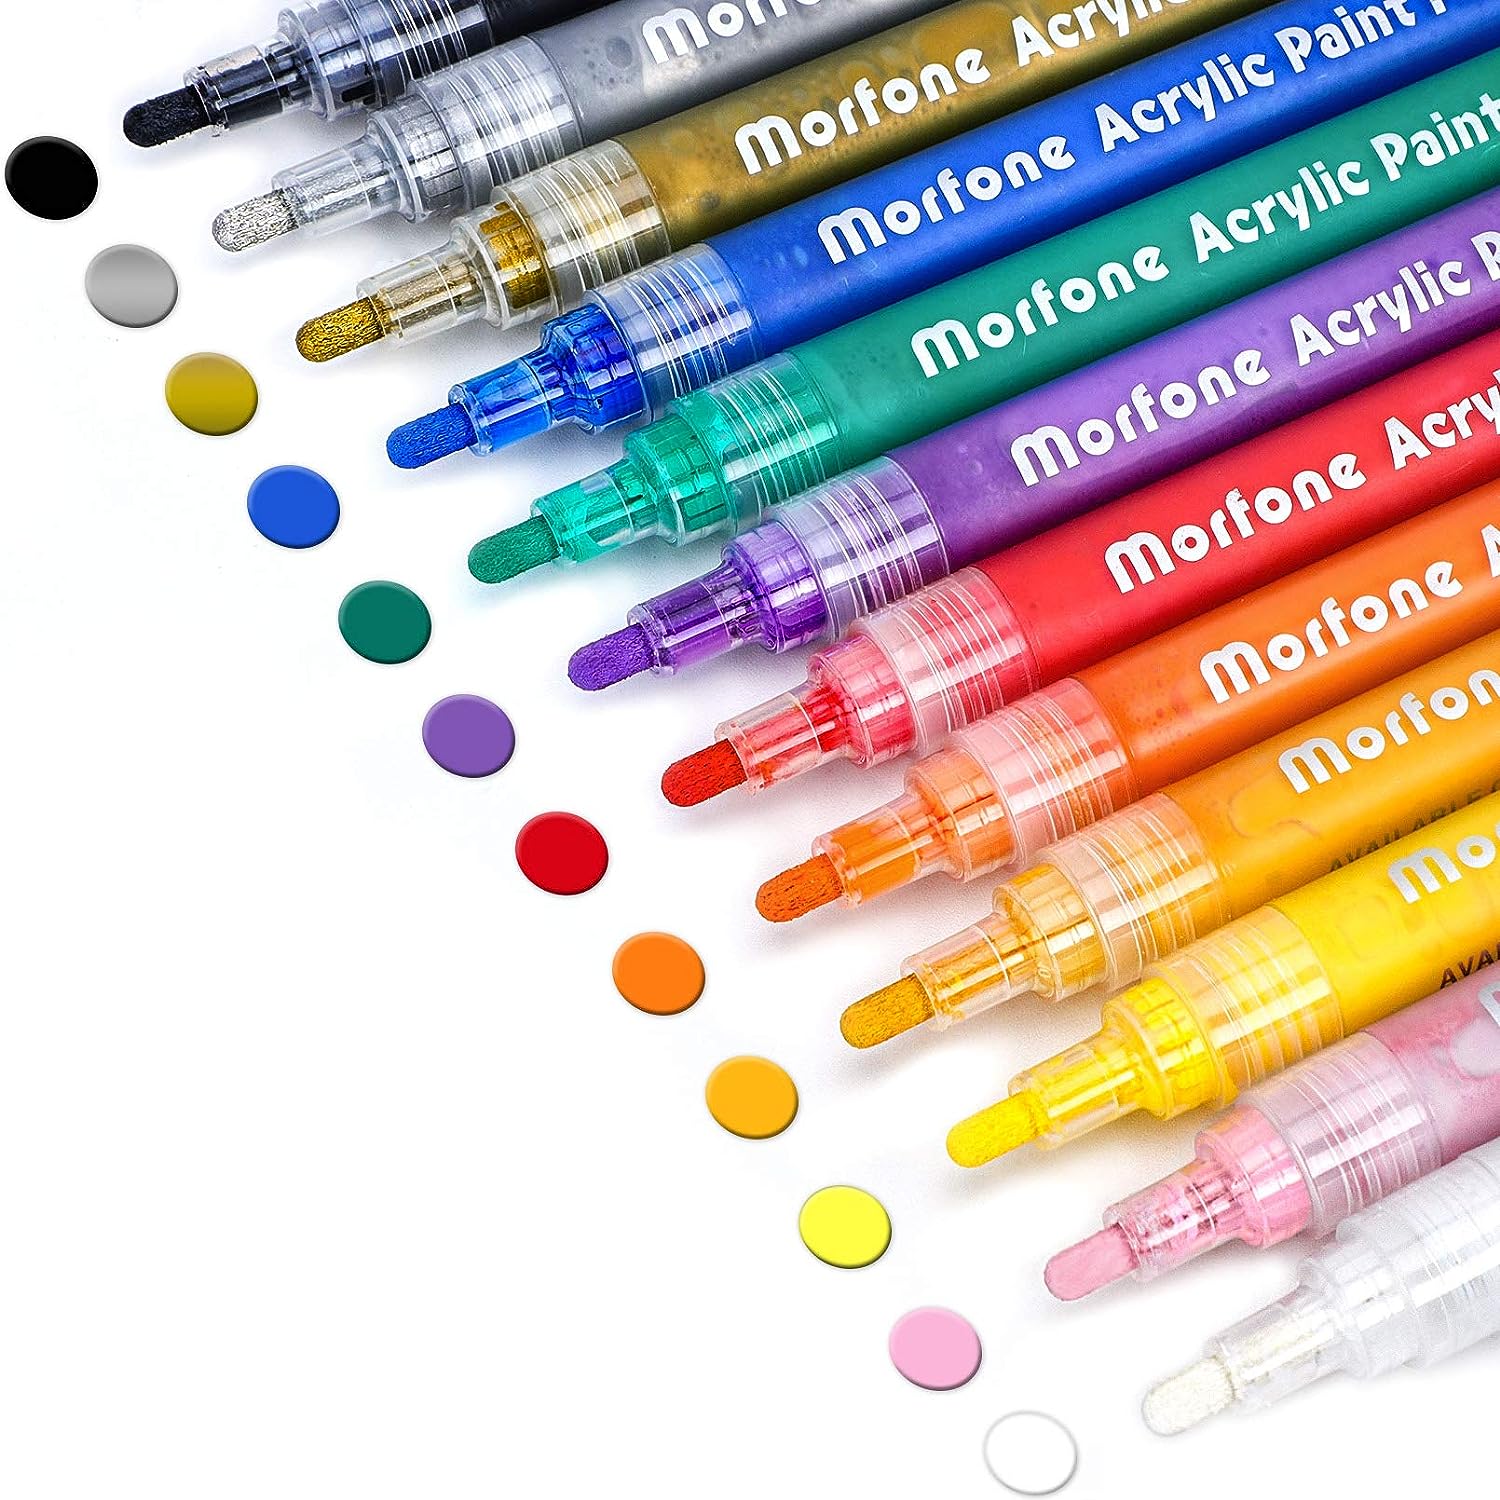 How To Store Paint Pens